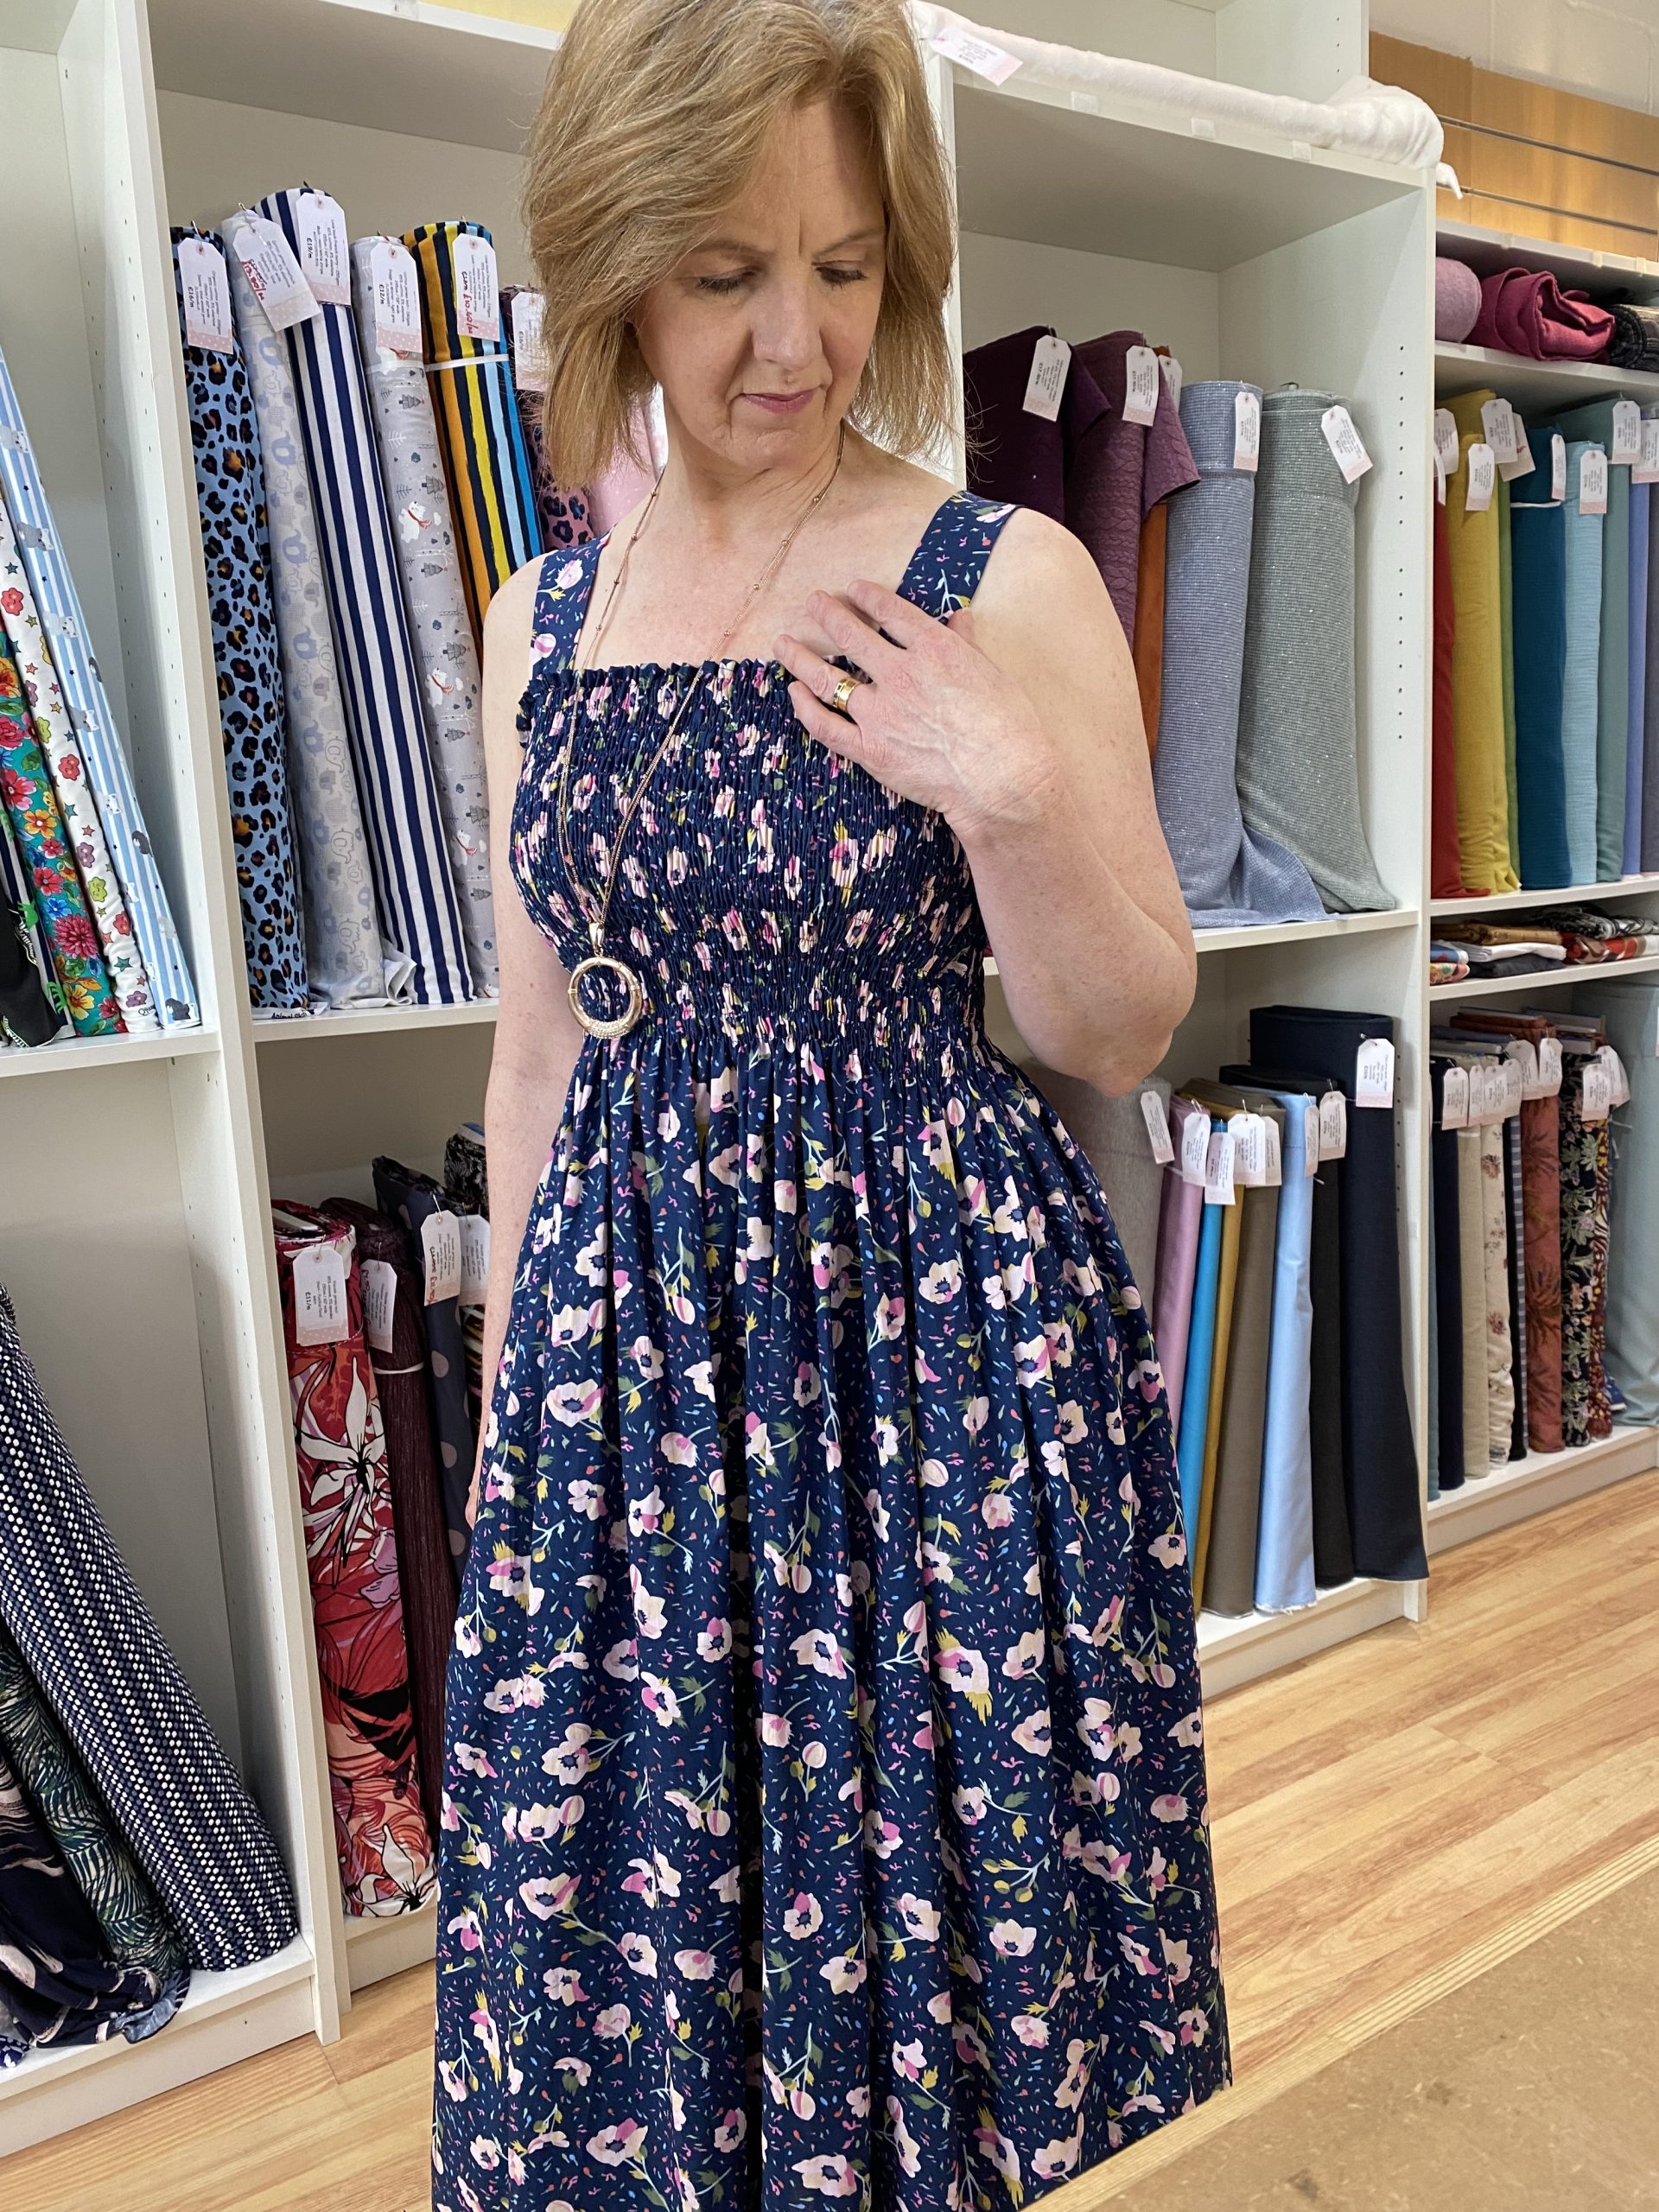 How to Make a Dress Without a Pattern (Vintage Style) | AllFreeSewing.com